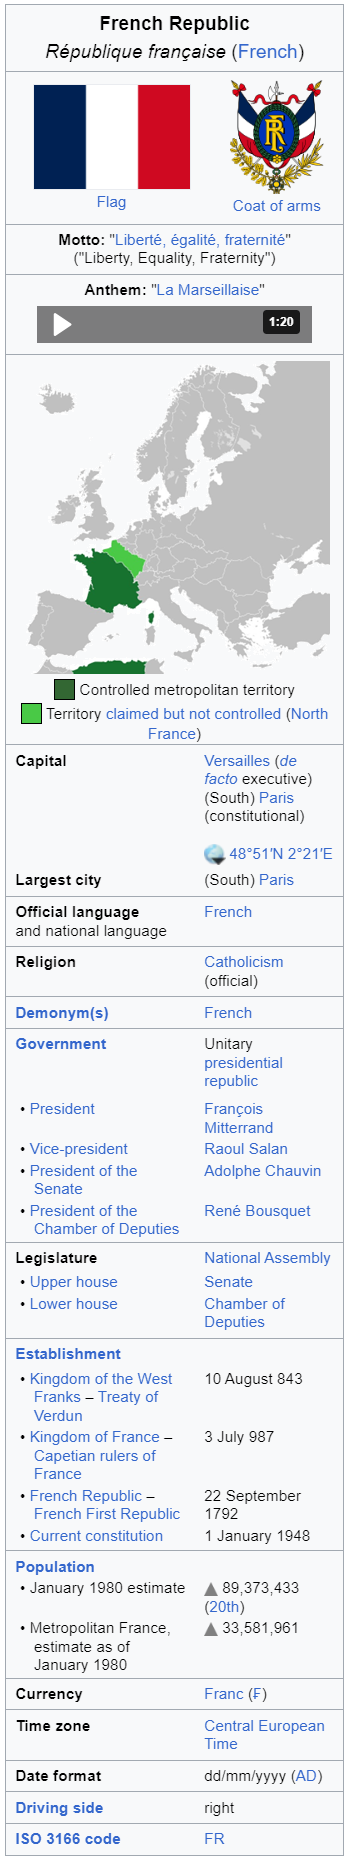 SouthFranceInfob.png